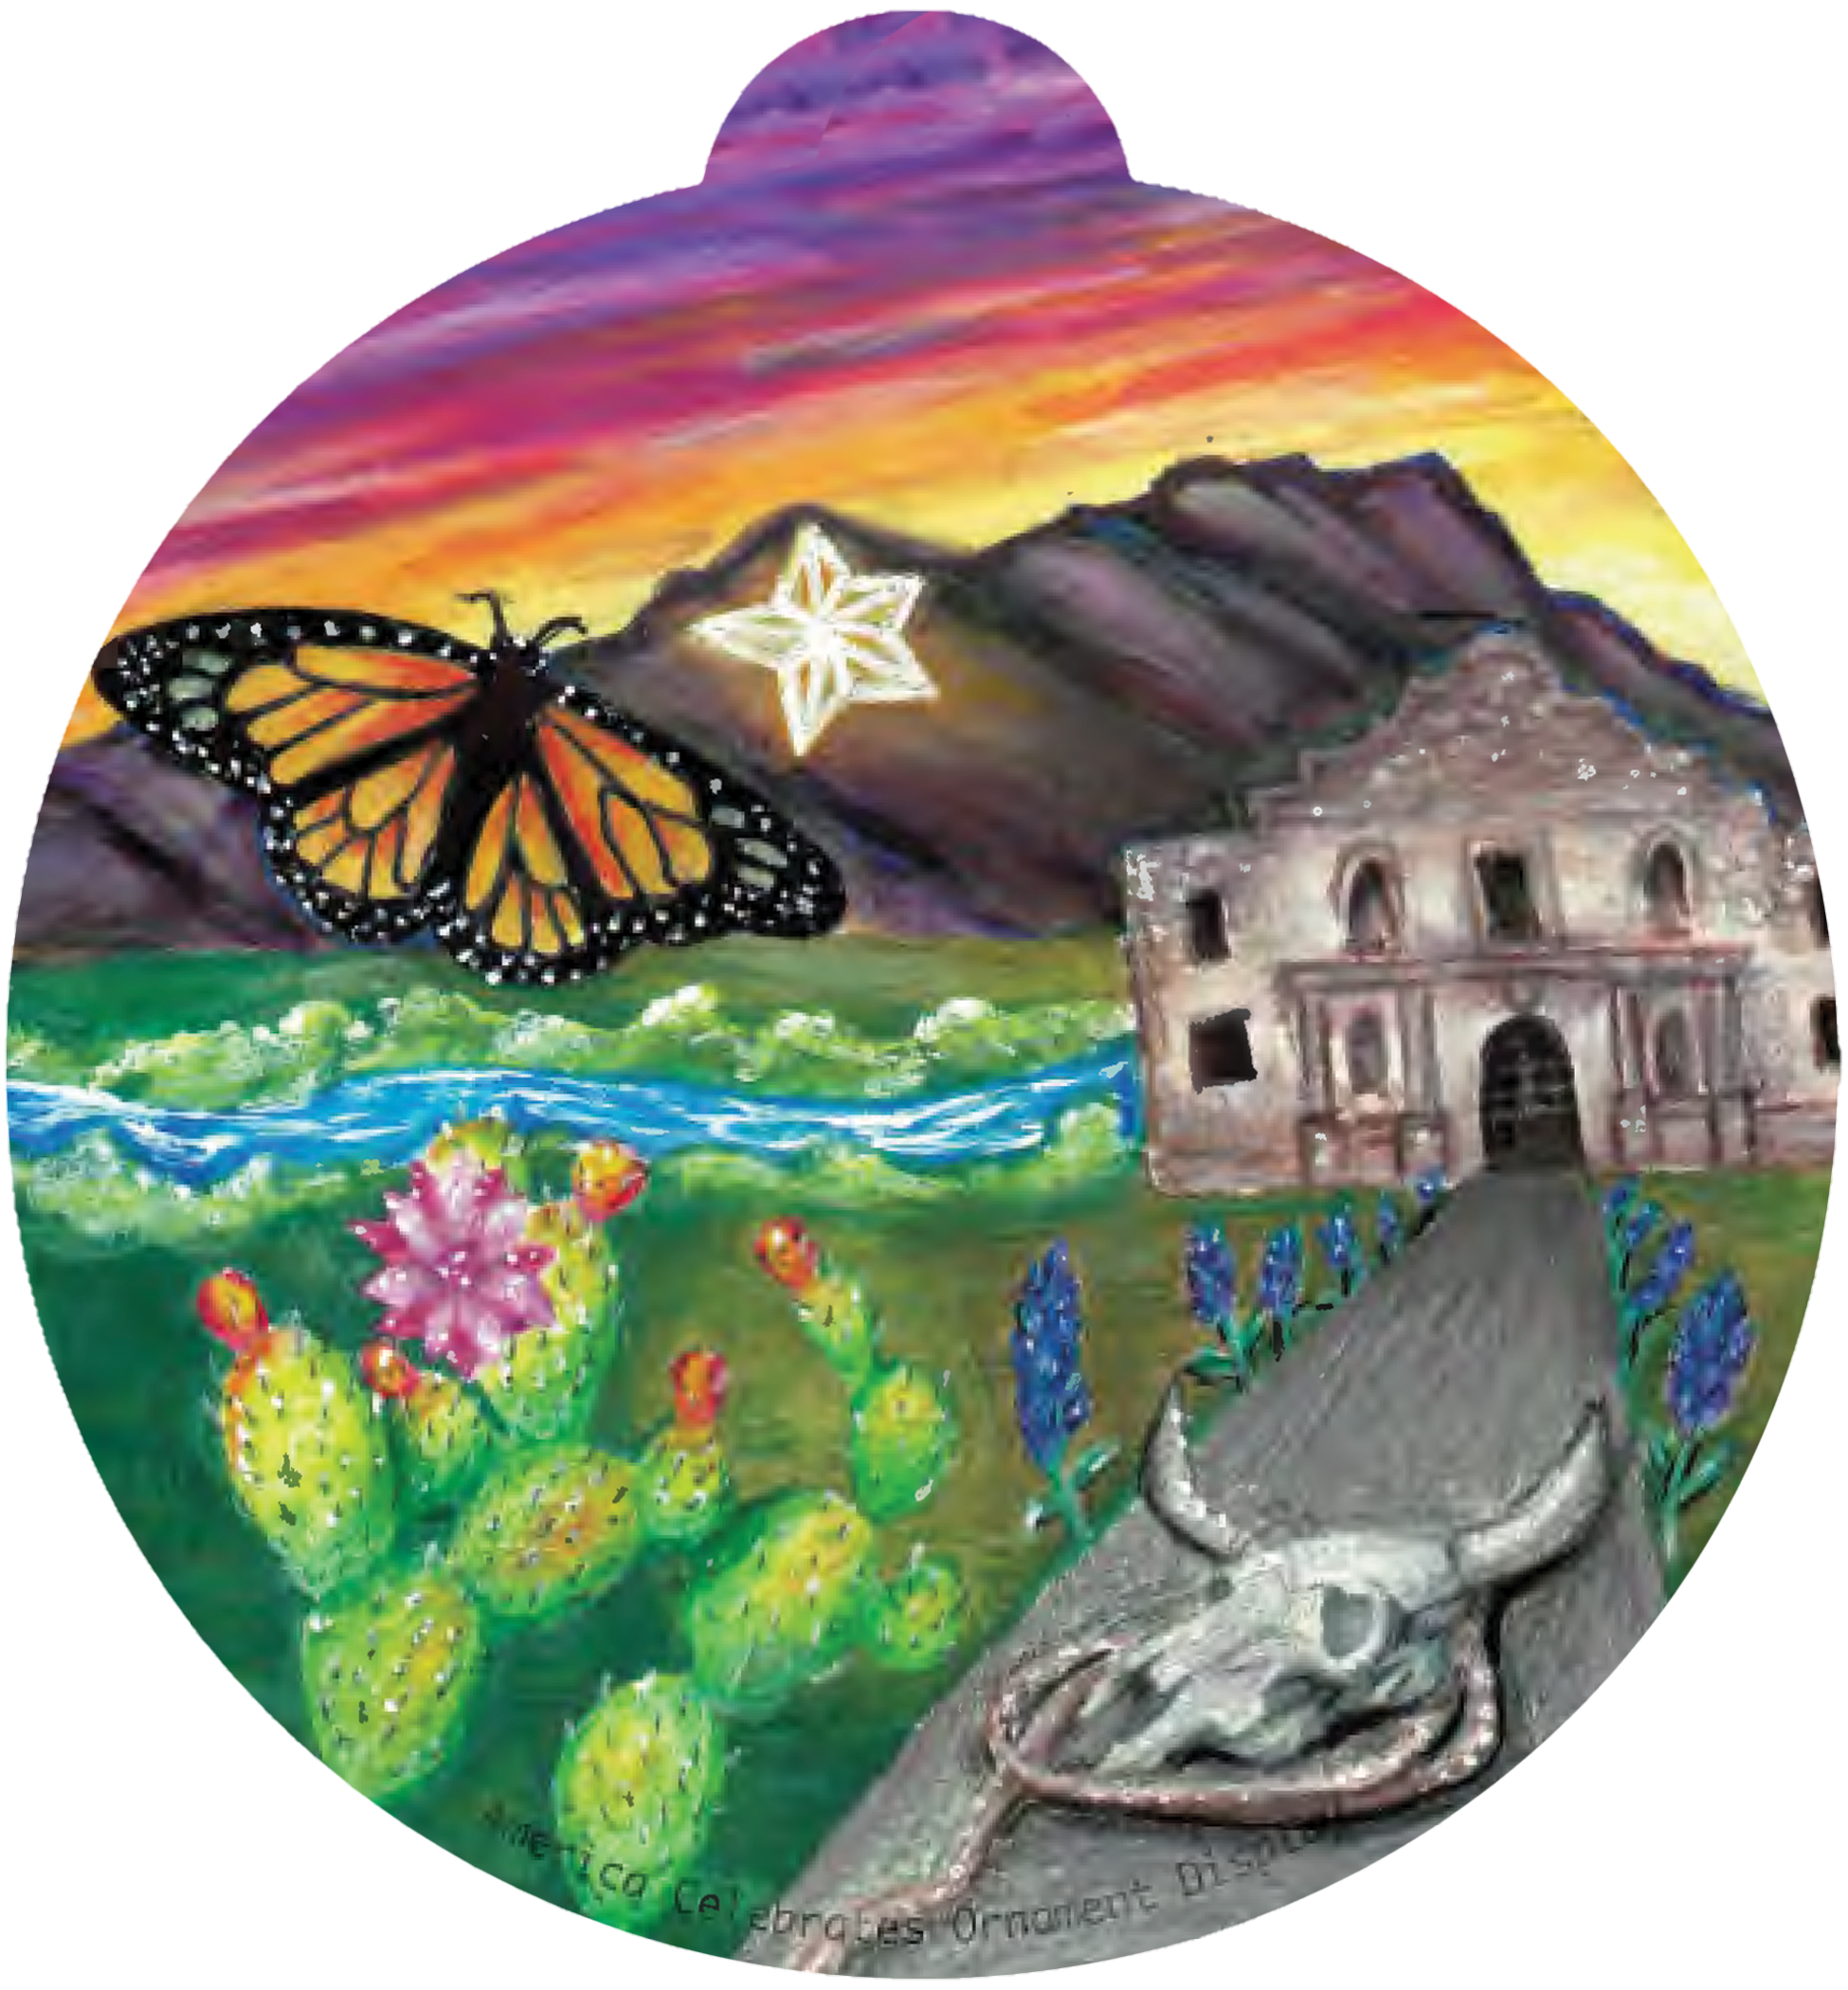 ornament depicting the Alamo, a monarch butterfly, mountains, cacti, and a sunset